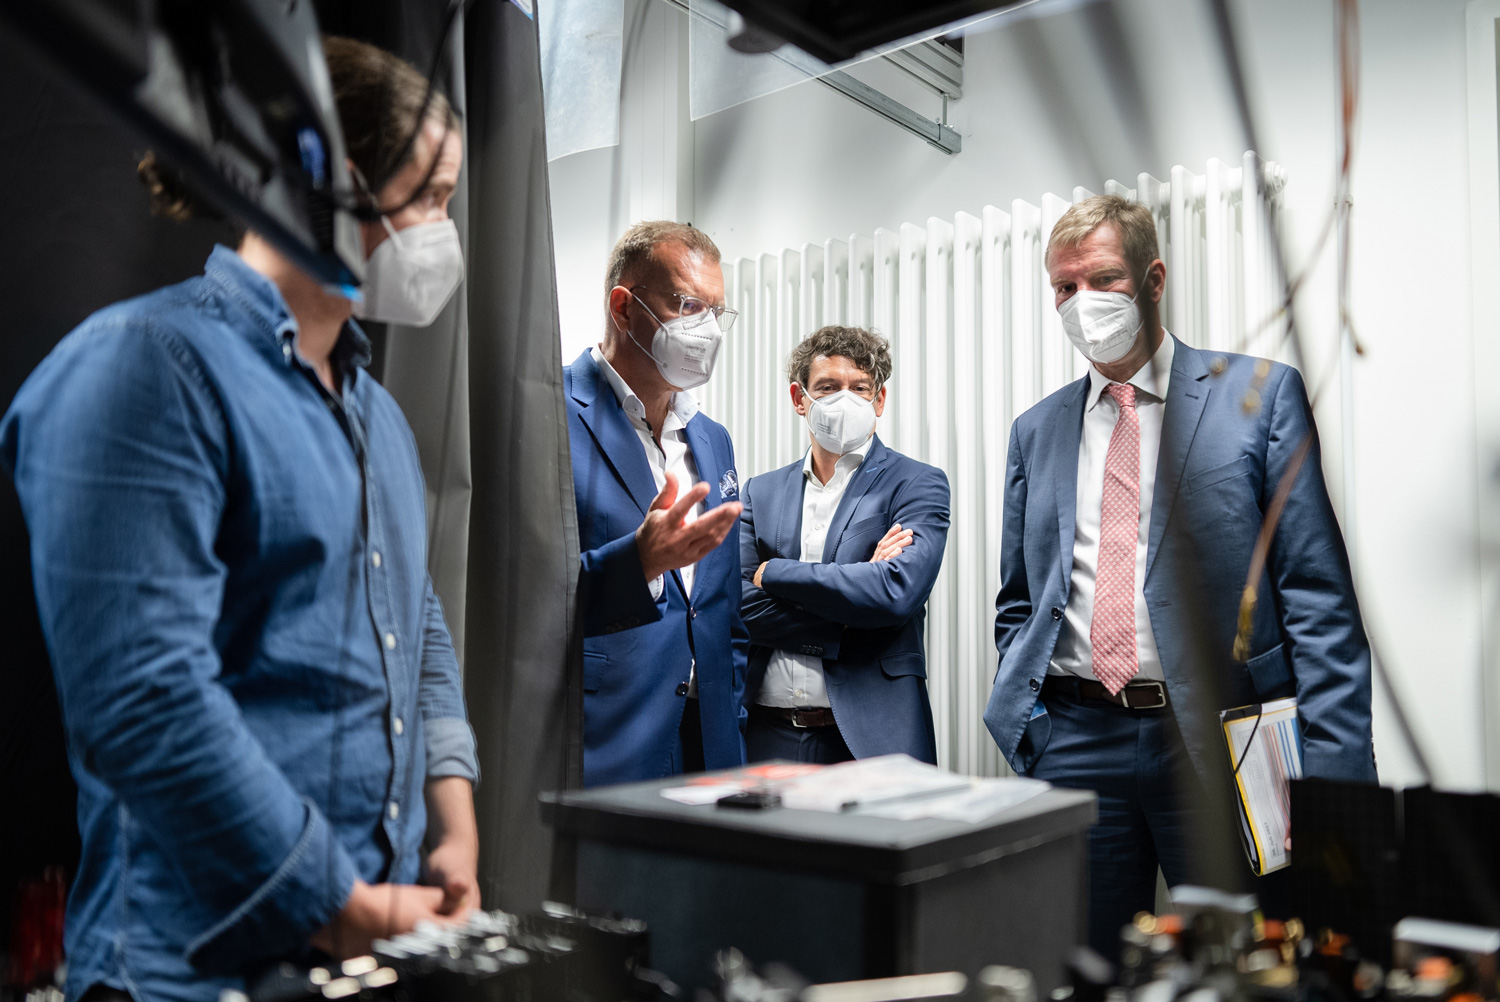 During his visit to the Fraunhofer IOF, State Secretary Carsten Feller also visited a quantum laboratory. Here in conversation with institute director Prof. Dr. Andreas Tünnermann.